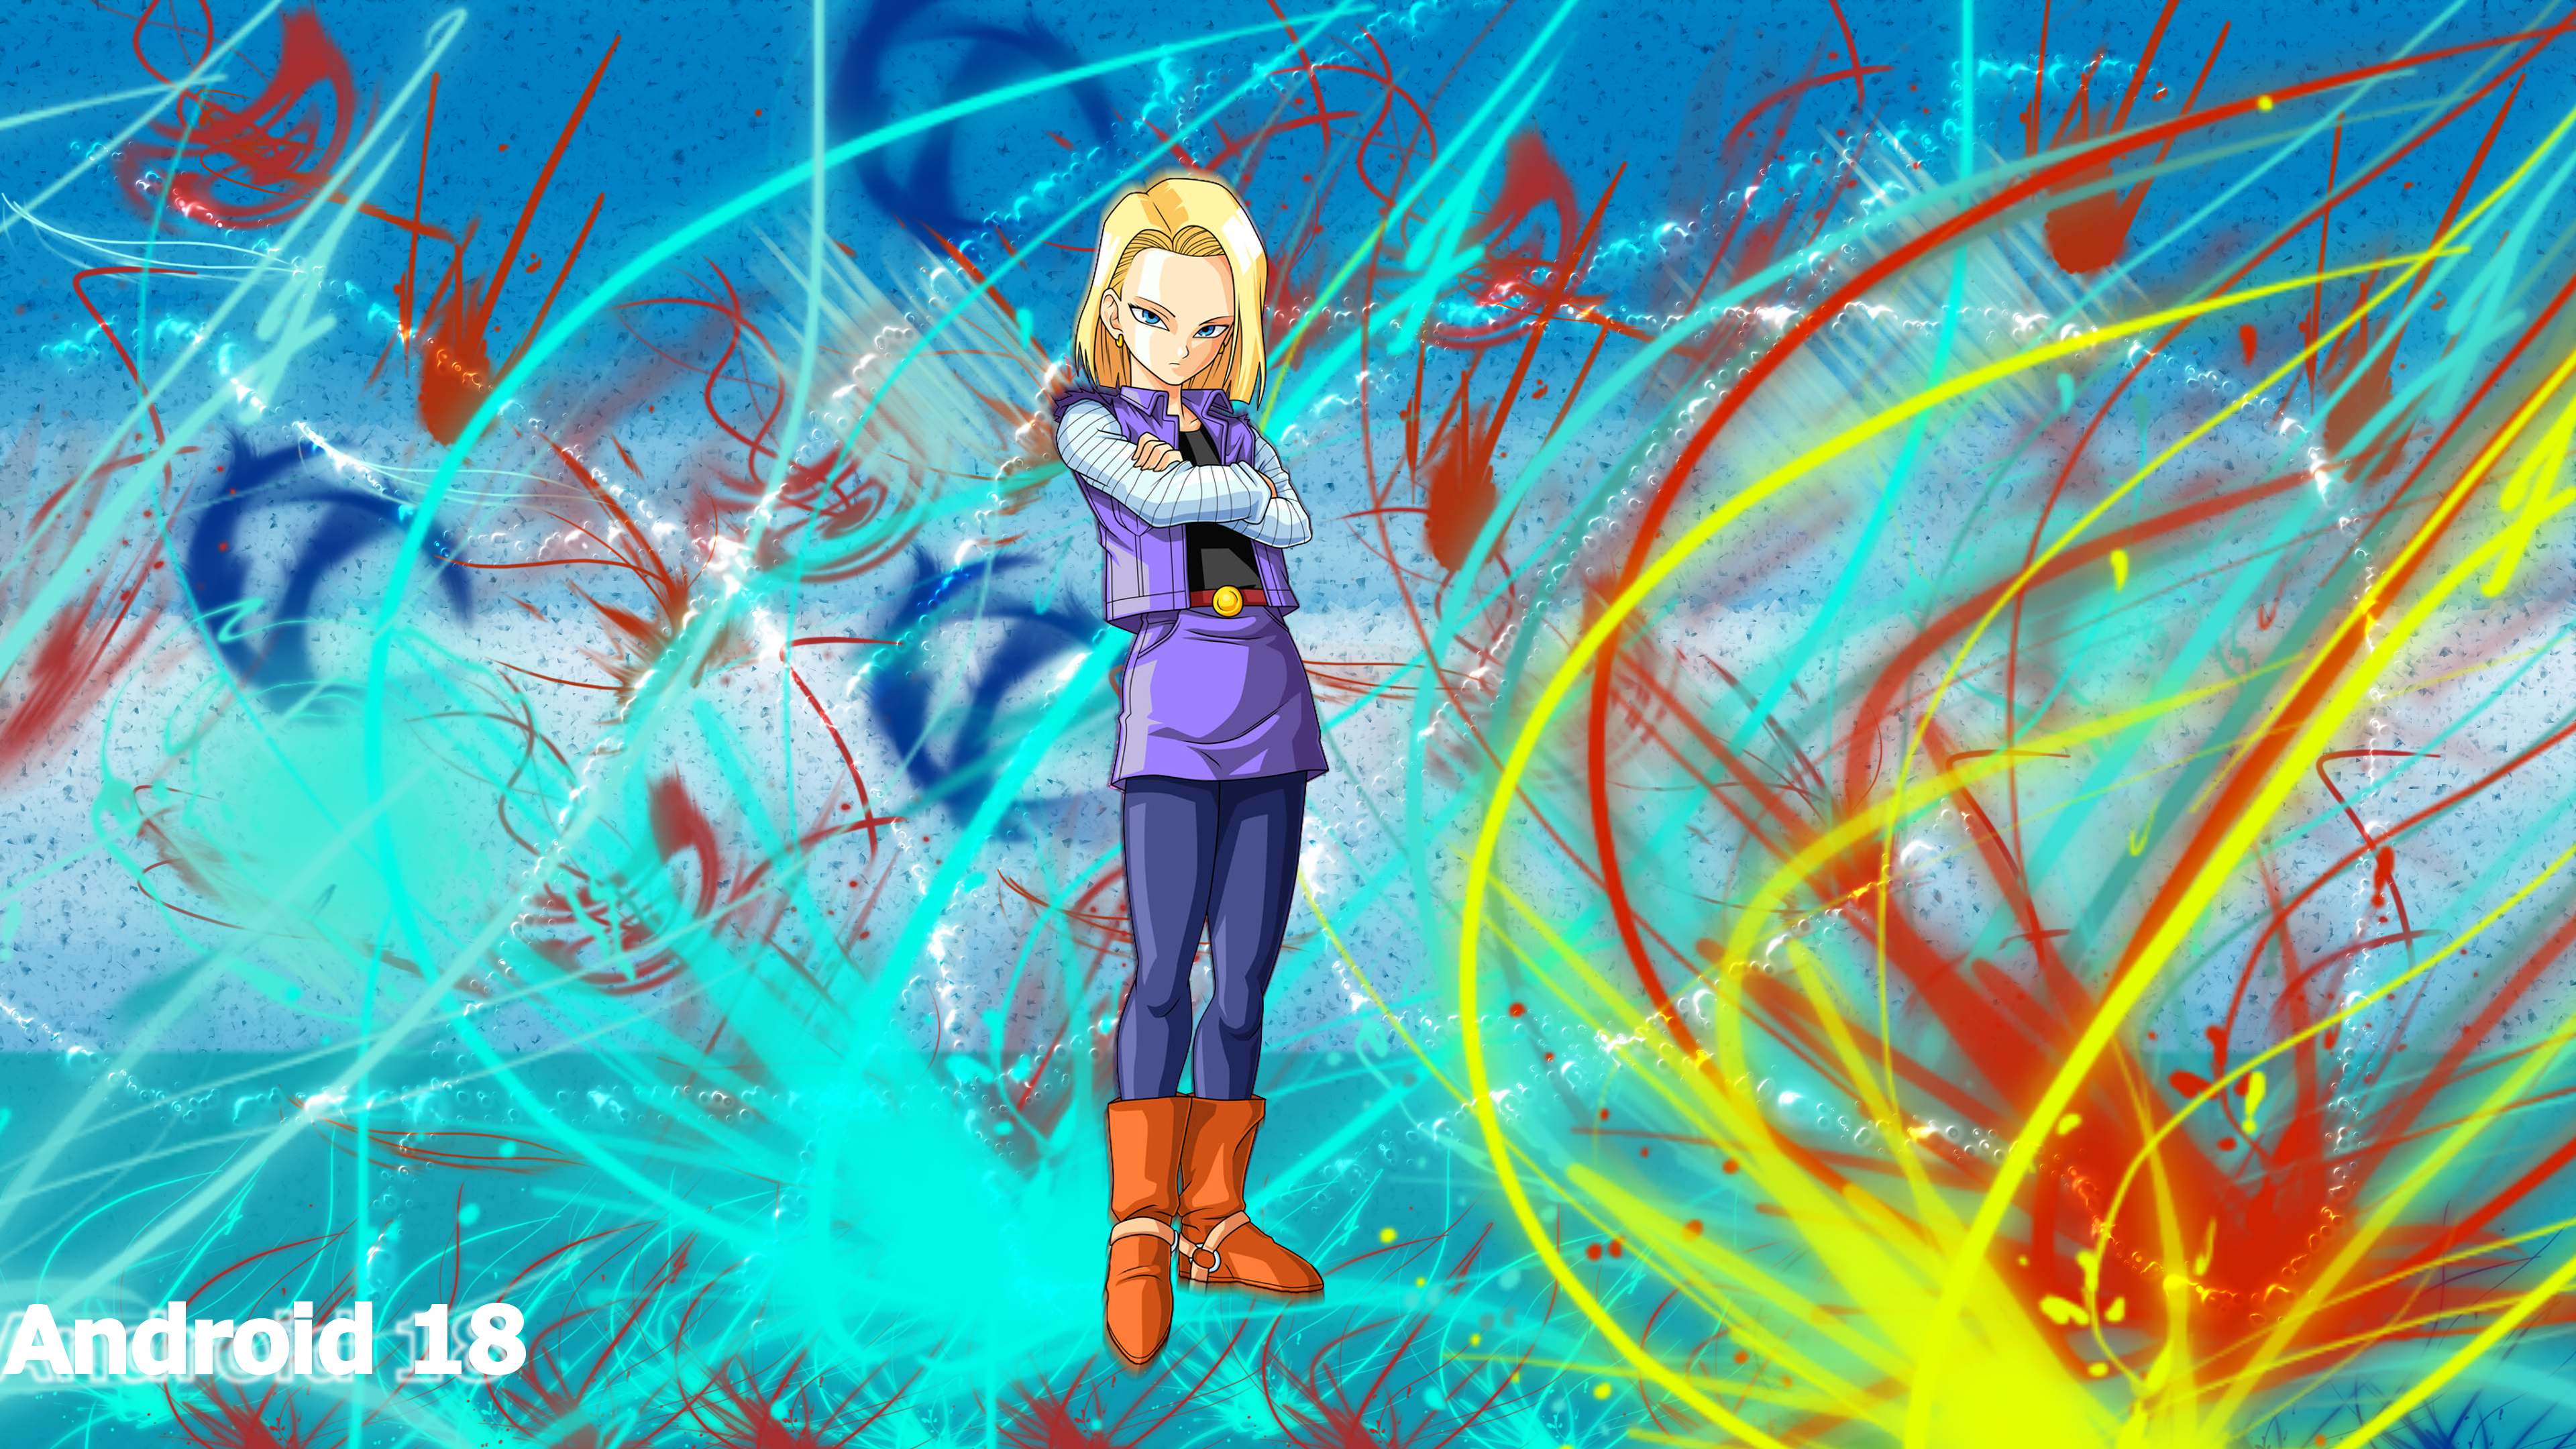 Android 18 Wallpaper by DragonsWarth18 on DeviantArt